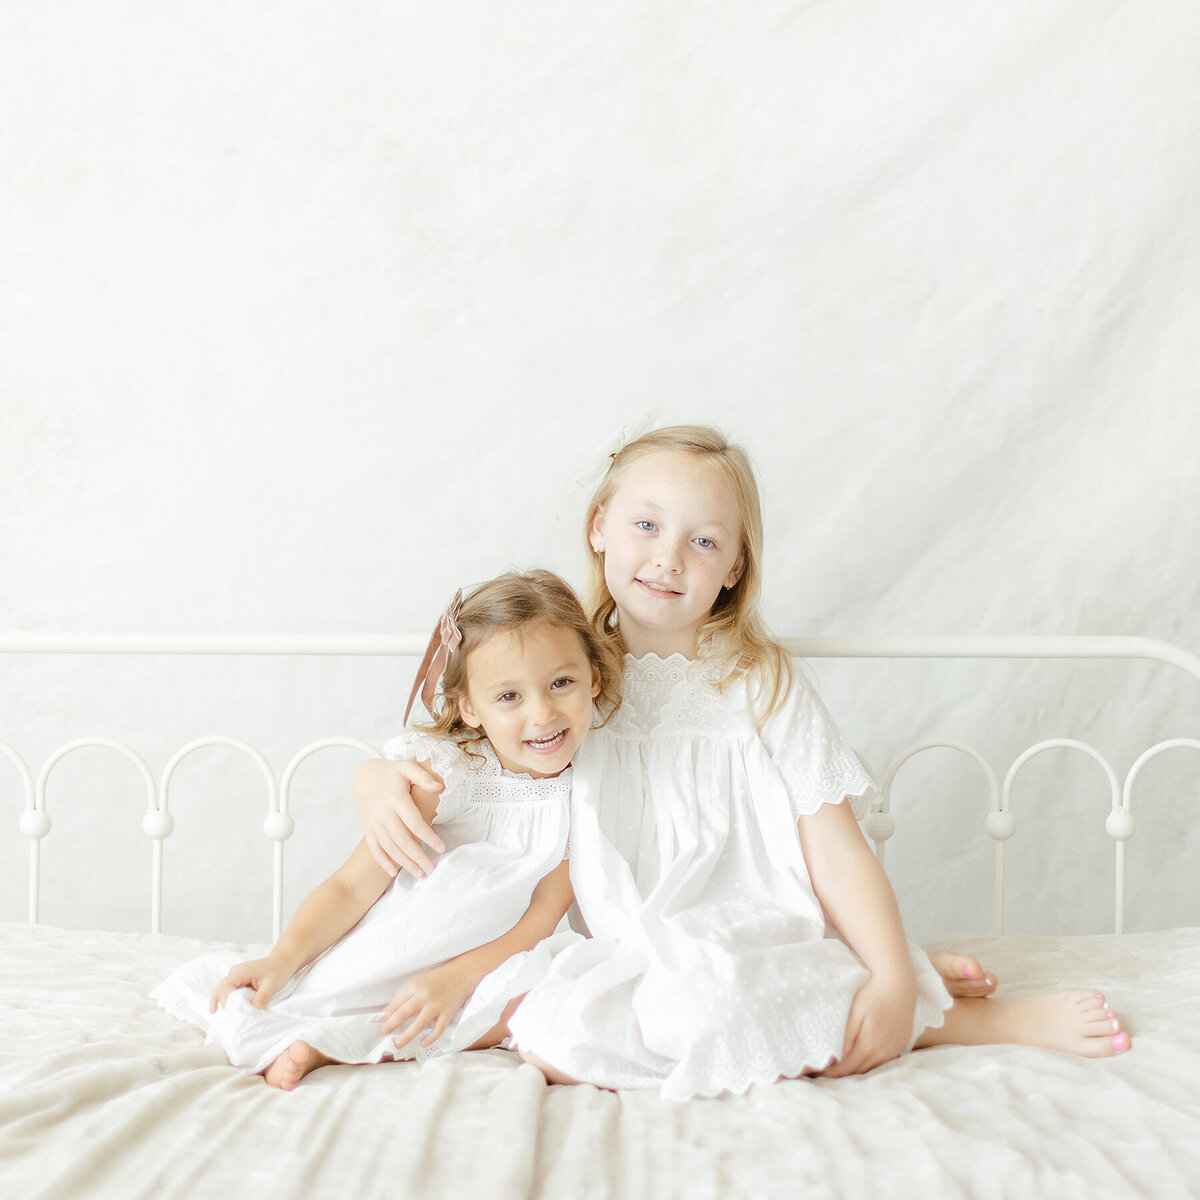 2 little sisters sitting on a bed all snuggled together in a Dallas photography studio for their family portraits.